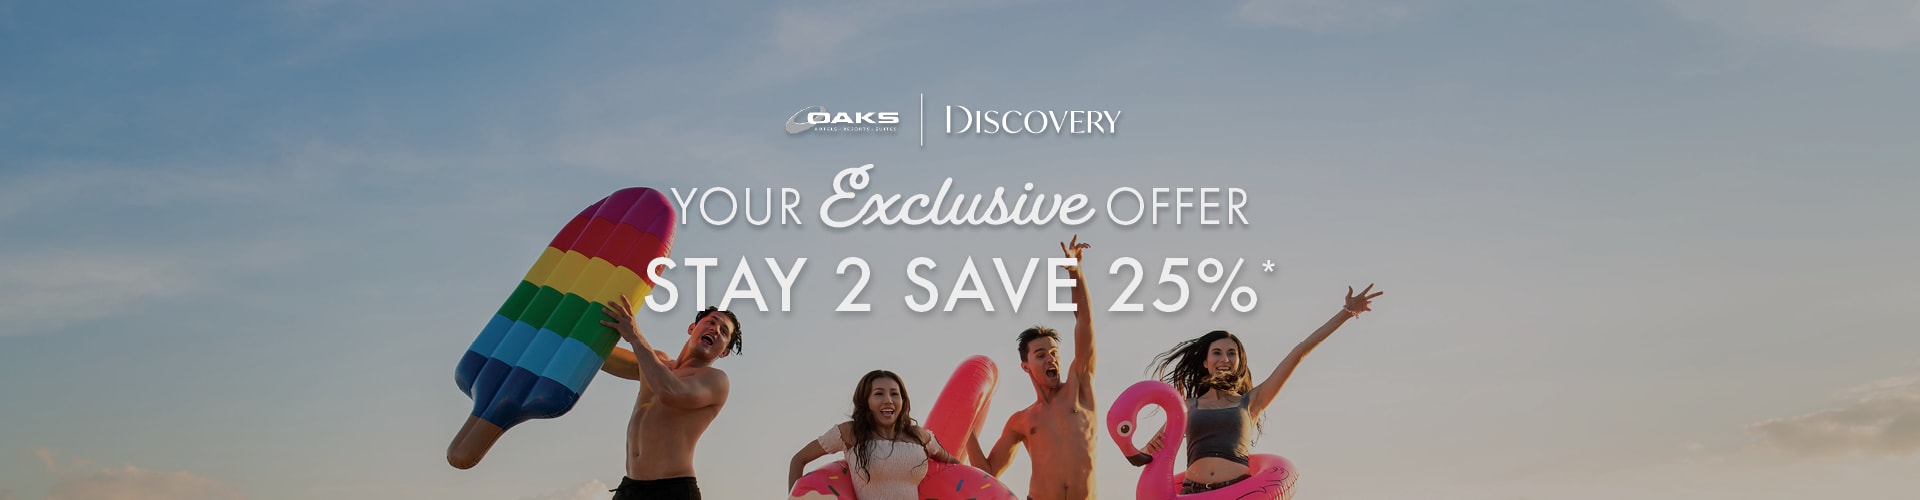 Discovery Exclusive Offers Landing Page